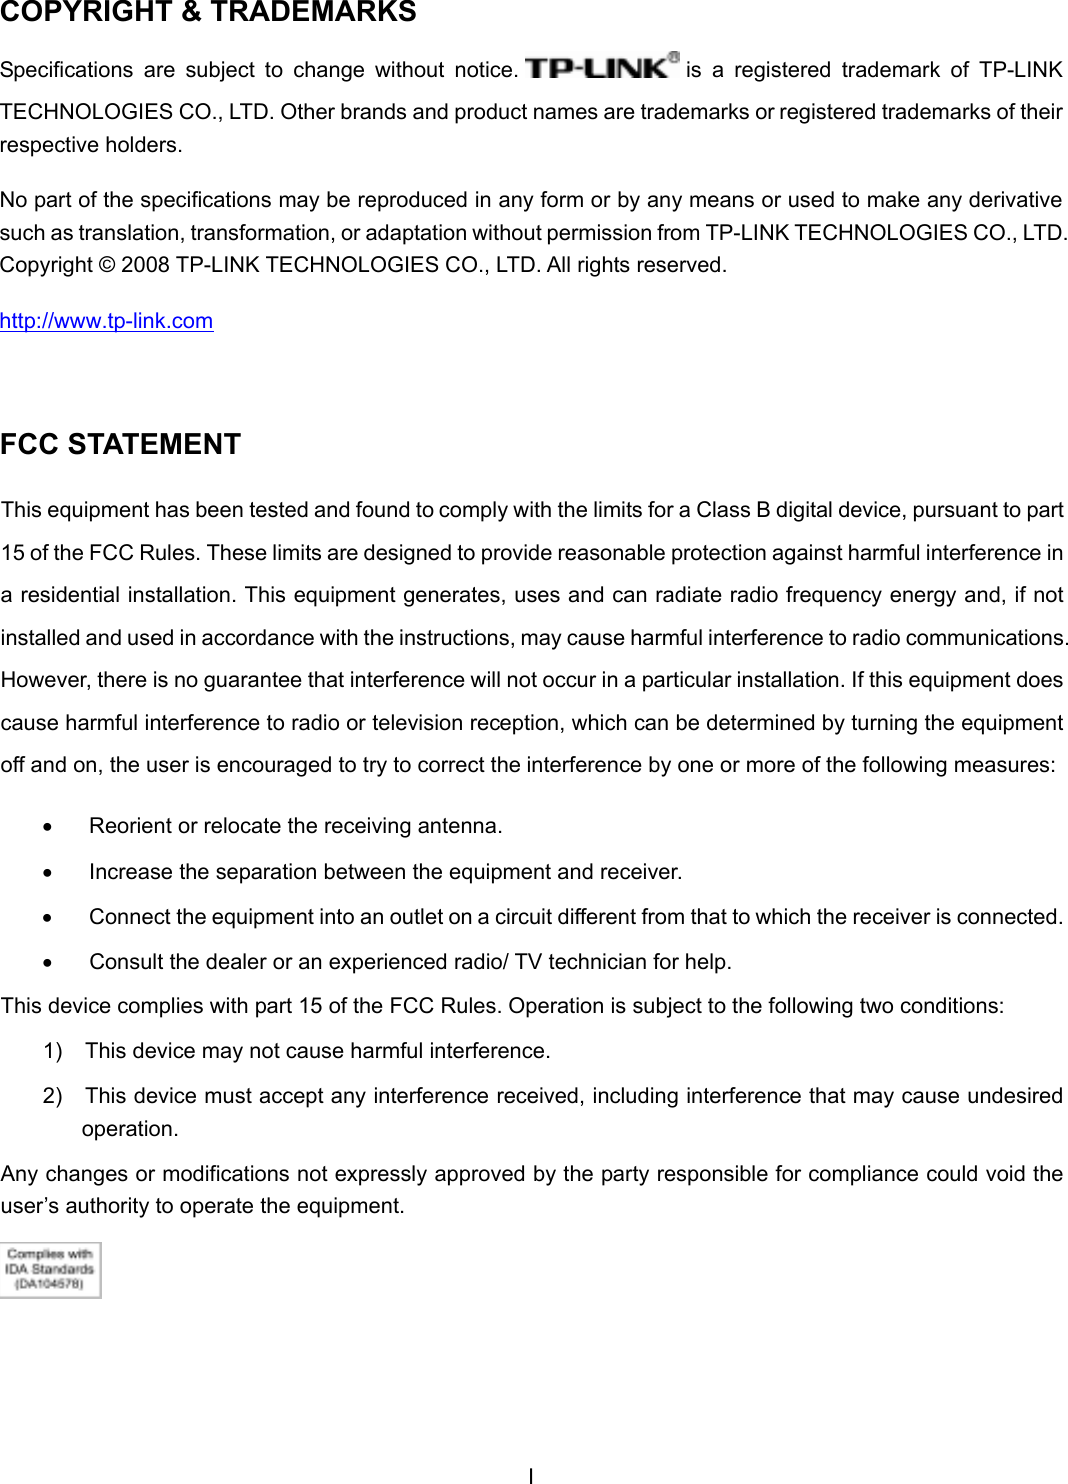 ICOPYRIGHT &amp; TRADEMARKSSpecifications  are  subject  to  change  without  notice.   is  a  registered  trademark  of  TP-LINK TECHNOLOGIES CO., LTD. Other brands and product names are trademarks or registered trademarks of their respective holders. No part of the specifications may be reproduced in any form or by any means or used to make any derivative such as translation, transformation, or adaptation without permission from TP-LINK TECHNOLOGIES CO., LTD. Copyright © 2008 TP-LINK TECHNOLOGIES CO., LTD. All rights reserved. http://www.tp-link.comFCC STATEMENT This equipment has been tested and found to comply with the limits for a Class B digital device, pursuant to part 15 of the FCC Rules. These limits are designed to provide reasonable protection against harmful interference in a residential installation. This equipment generates, uses and can radiate radio frequency energy and, if not installed and used in accordance with the instructions, may cause harmful interference to radio communications. However, there is no guarantee that interference will not occur in a particular installation. If this equipment does cause harmful interference to radio or television reception, which can be determined by turning the equipment off and on, the user is encouraged to try to correct the interference by one or more of the following measures: •  Reorient or relocate the receiving antenna. •  Increase the separation between the equipment and receiver. •  Connect the equipment into an outlet on a circuit different from that to which the receiver is connected.  •  Consult the dealer or an experienced radio/ TV technician for help. This device complies with part 15 of the FCC Rules. Operation is subject to the following two conditions: 1)  This device may not cause harmful interference. 2)  This device must accept any interference received, including interference that may cause undesired operation. Any changes or modifications not expressly approved by the party responsible for compliance could void the user’s authority to operate the equipment. 